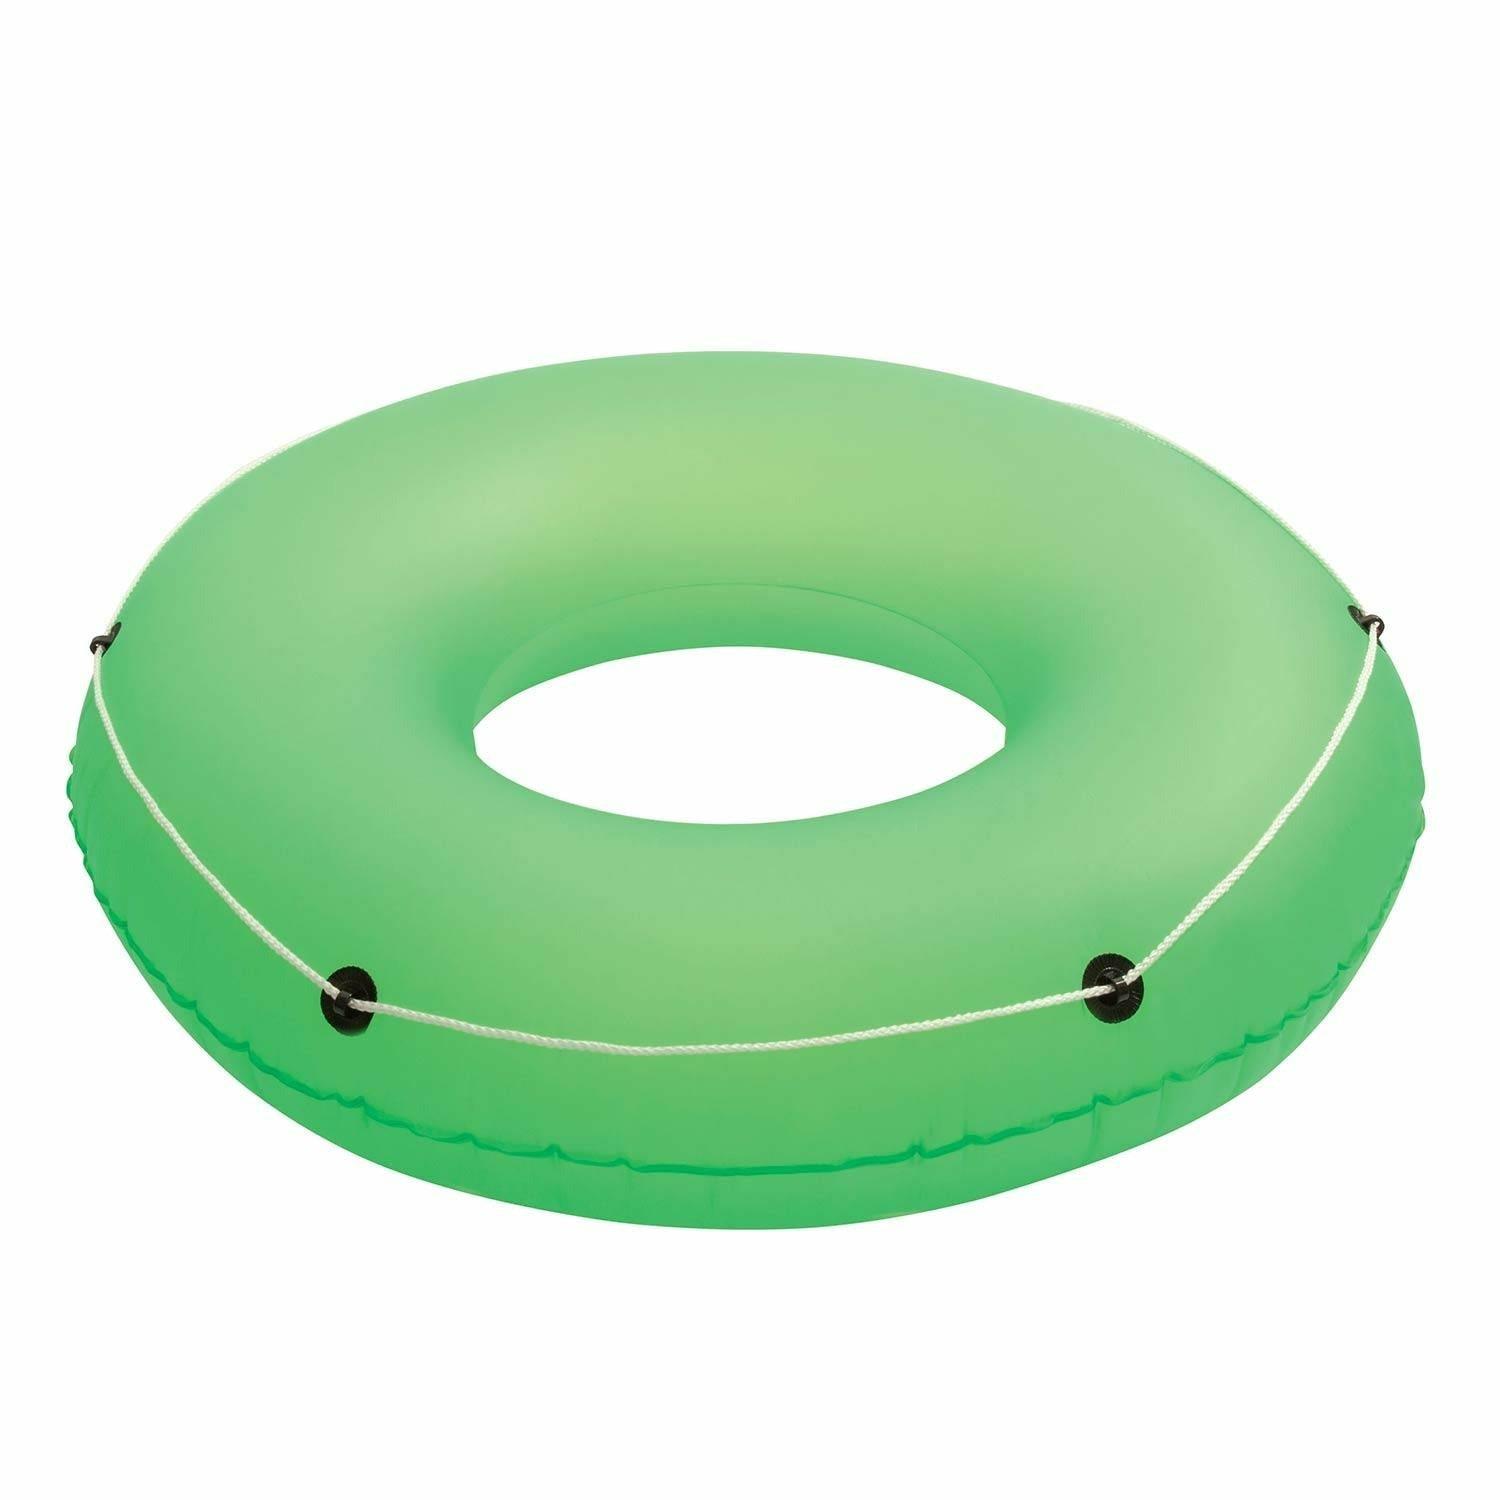 Bestway 36120 Inflatable Swim Ring 119 cm - Green - BumbleToys - 8-13 Years, Boys, Eagle Plus, Floaters, Girls, Sand Toys Pools & Inflatables